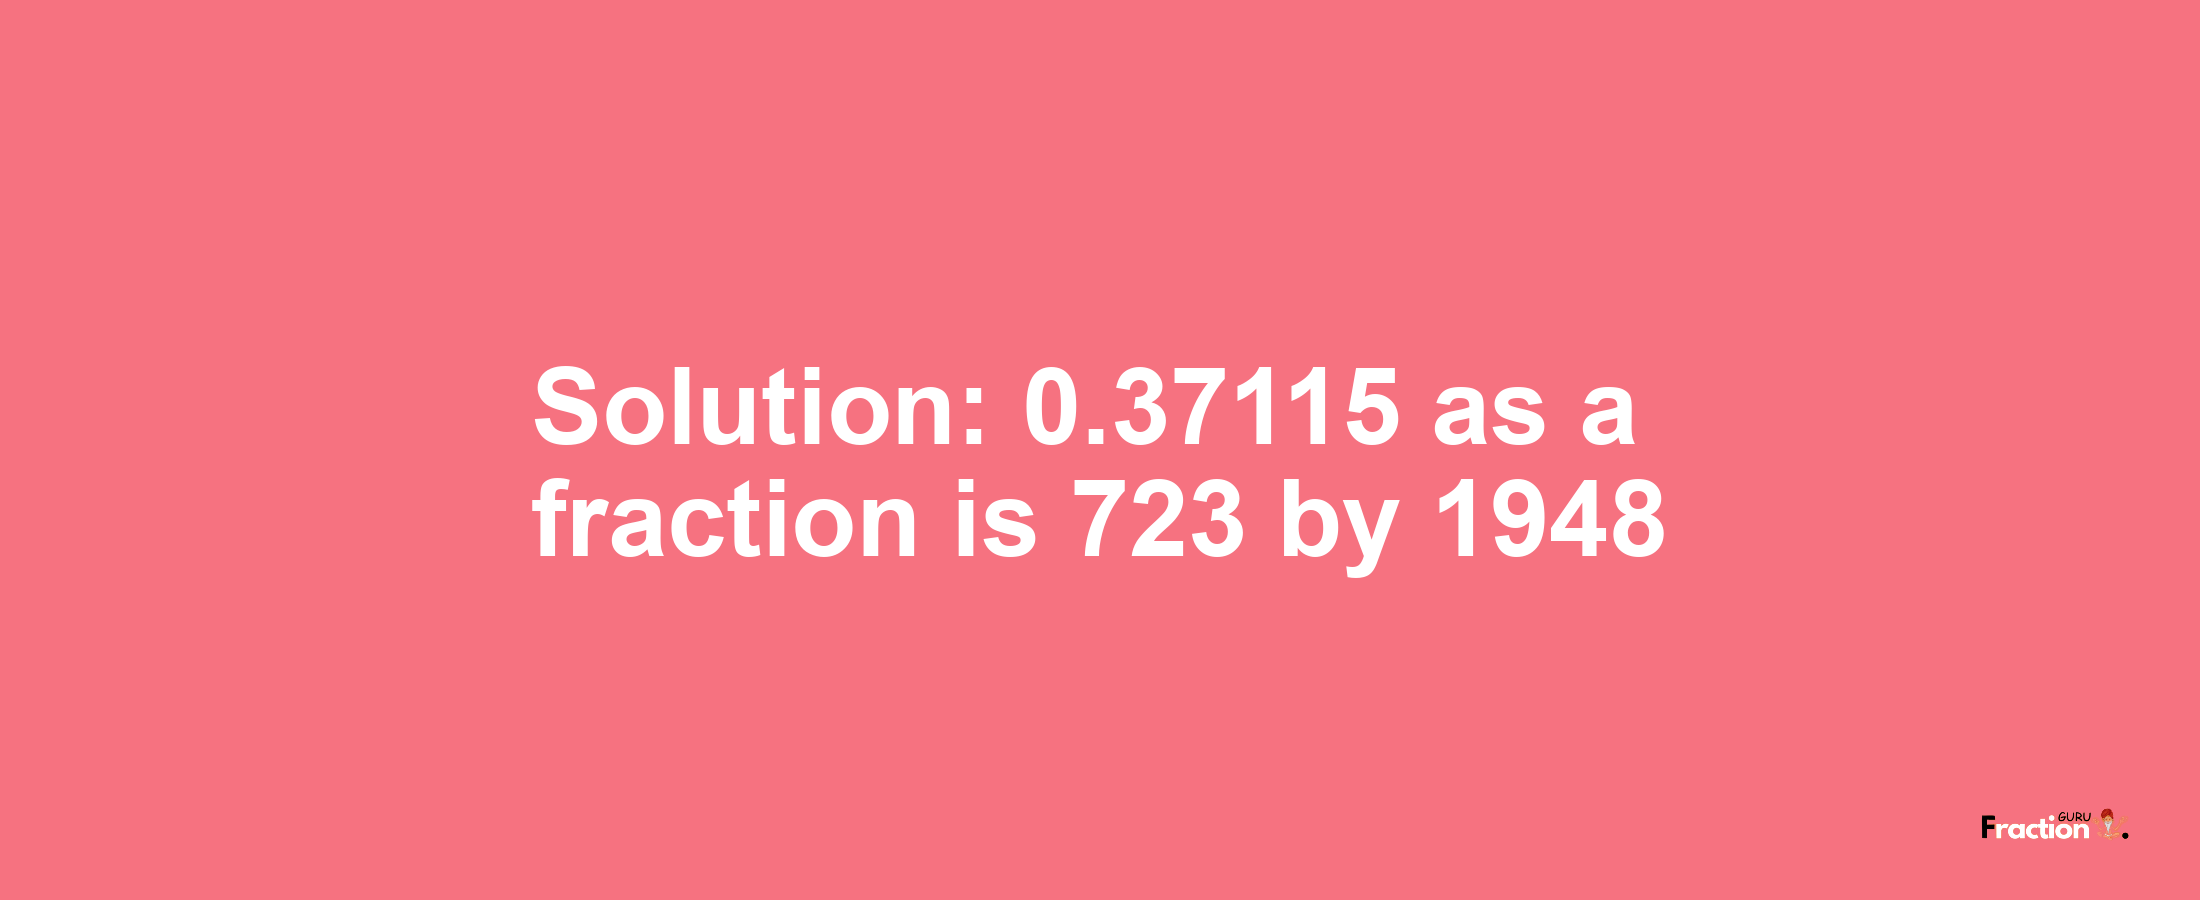 Solution:0.37115 as a fraction is 723/1948